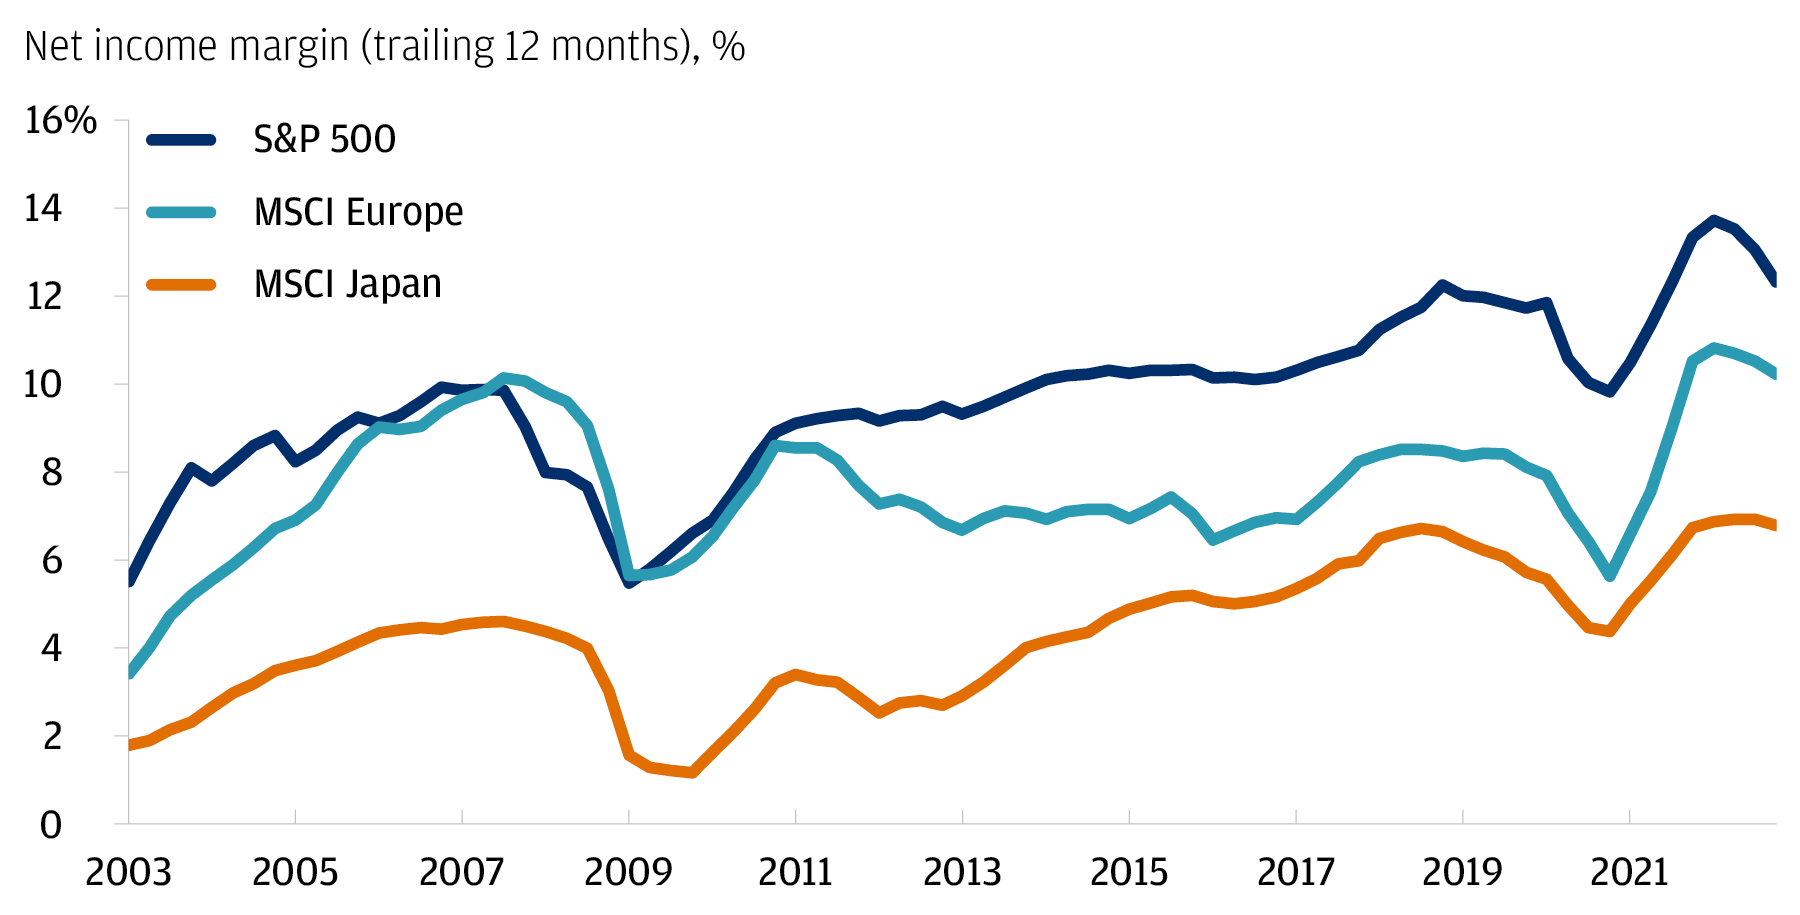 Line chart of quarterly S&P 500, MSCI Europe and MSCI Japan trailing twelve month net income margins shown since 2003 through Q4 2022, depicting a considerable upswing in margins across regions since Q4 2020. However, in the most recent few quarters the chart portrays a modest decline in margins; but still elevated.